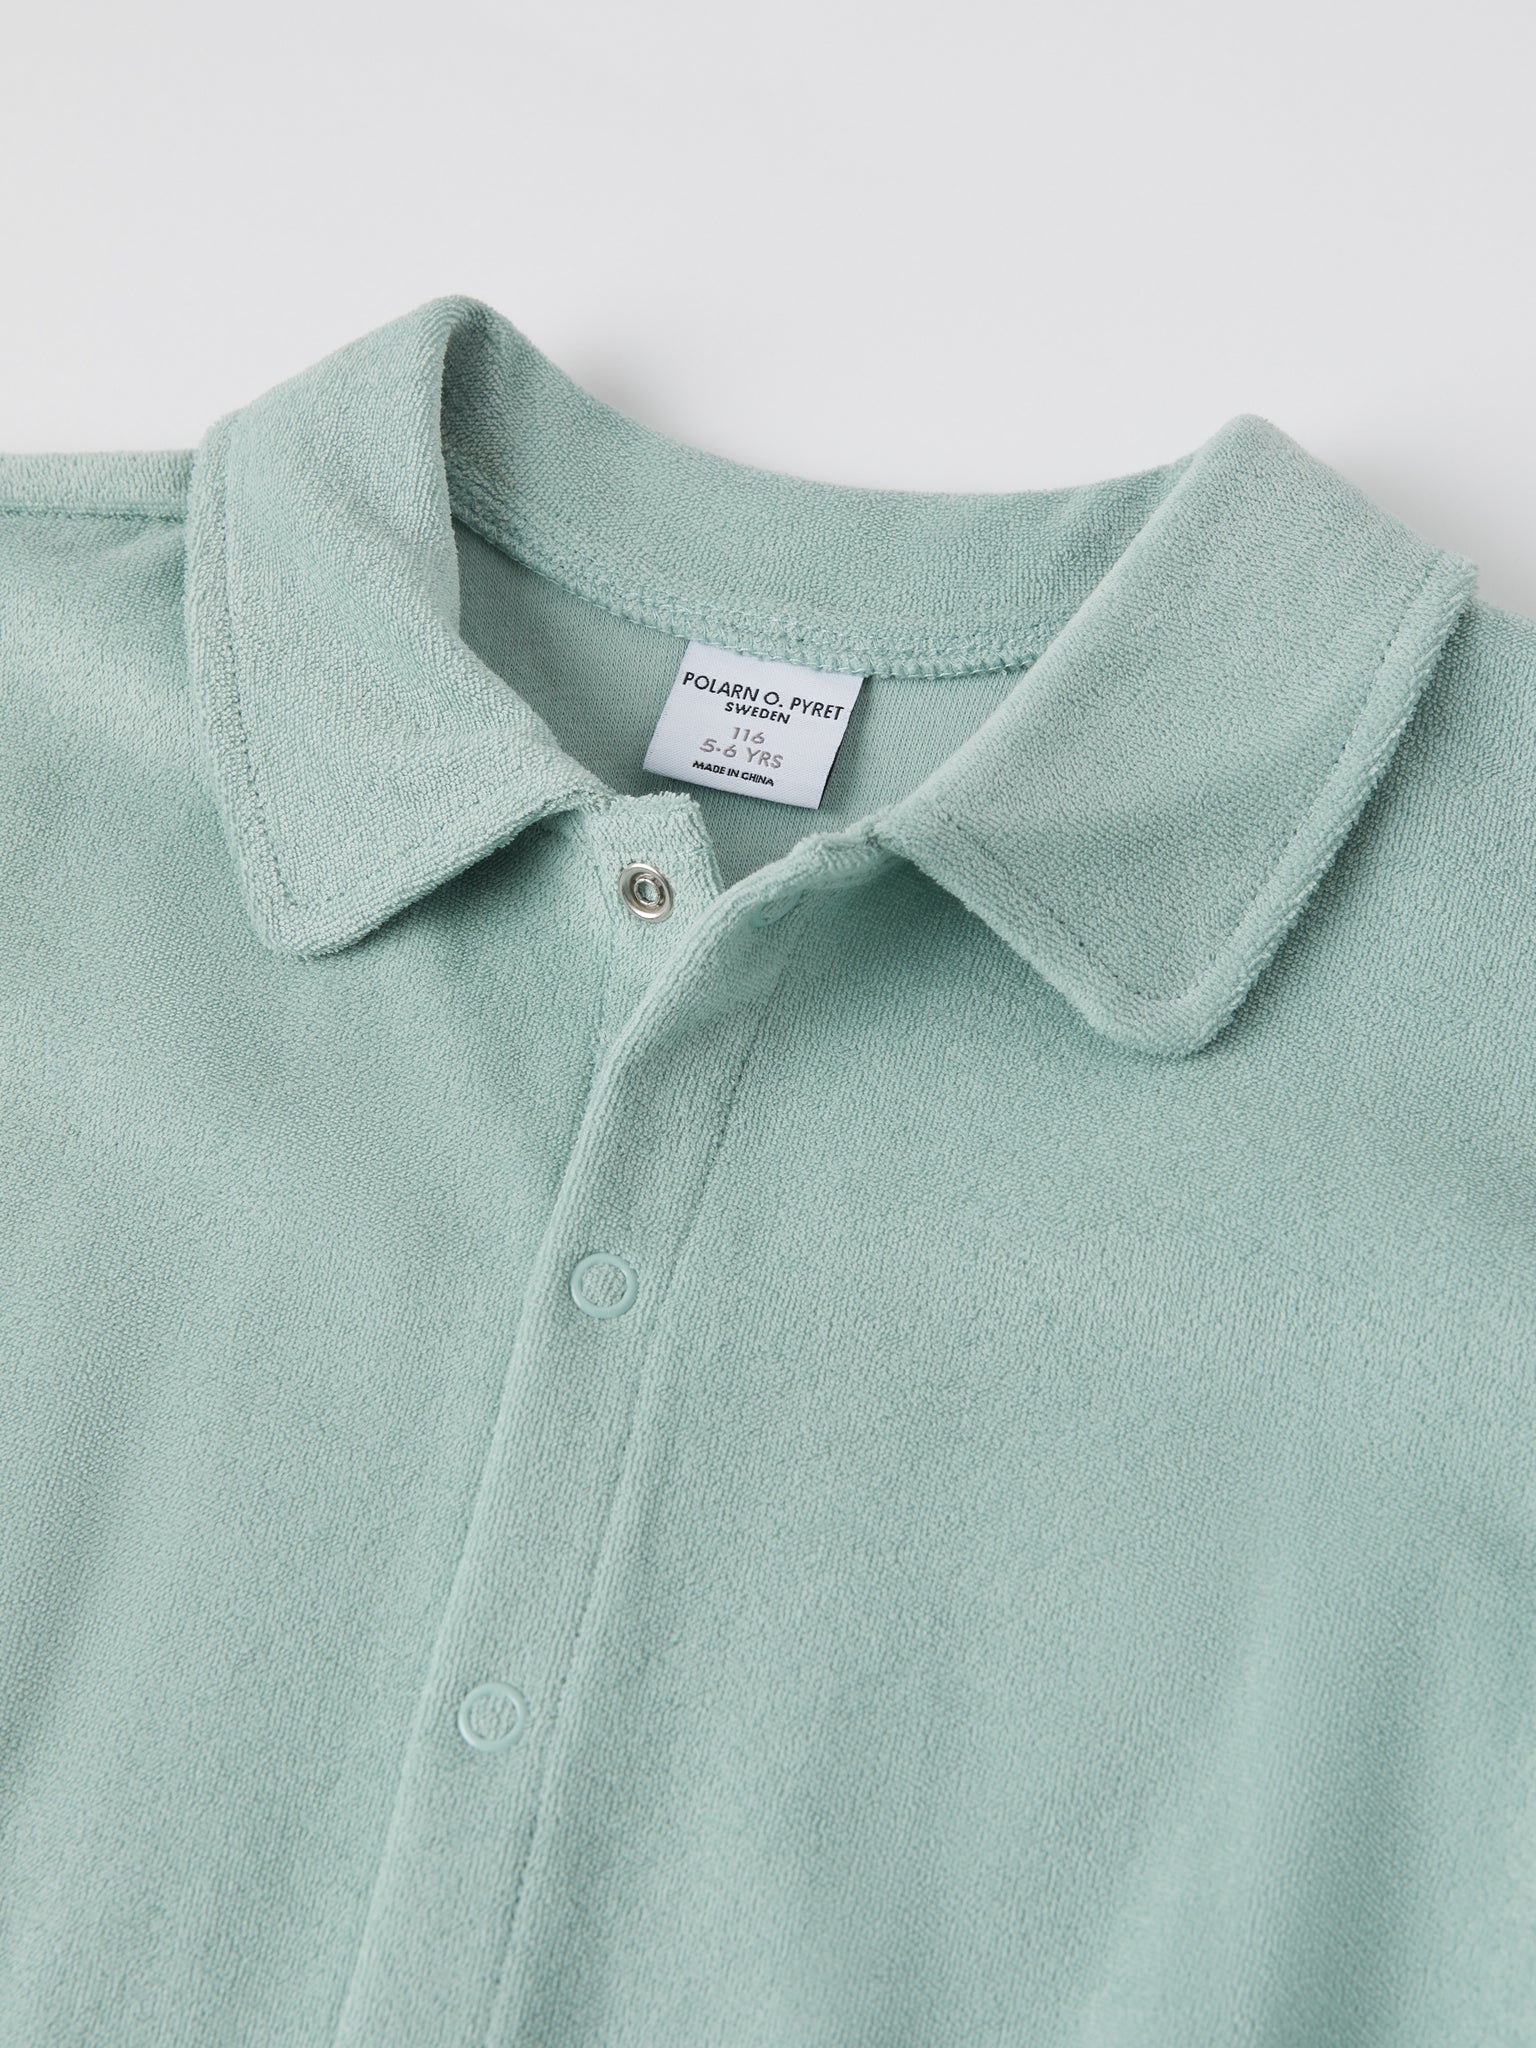 Green Cotton Kids Polo Shirt from the Polarn O. Pyret kidswear collection. Ethically produced kids clothing.